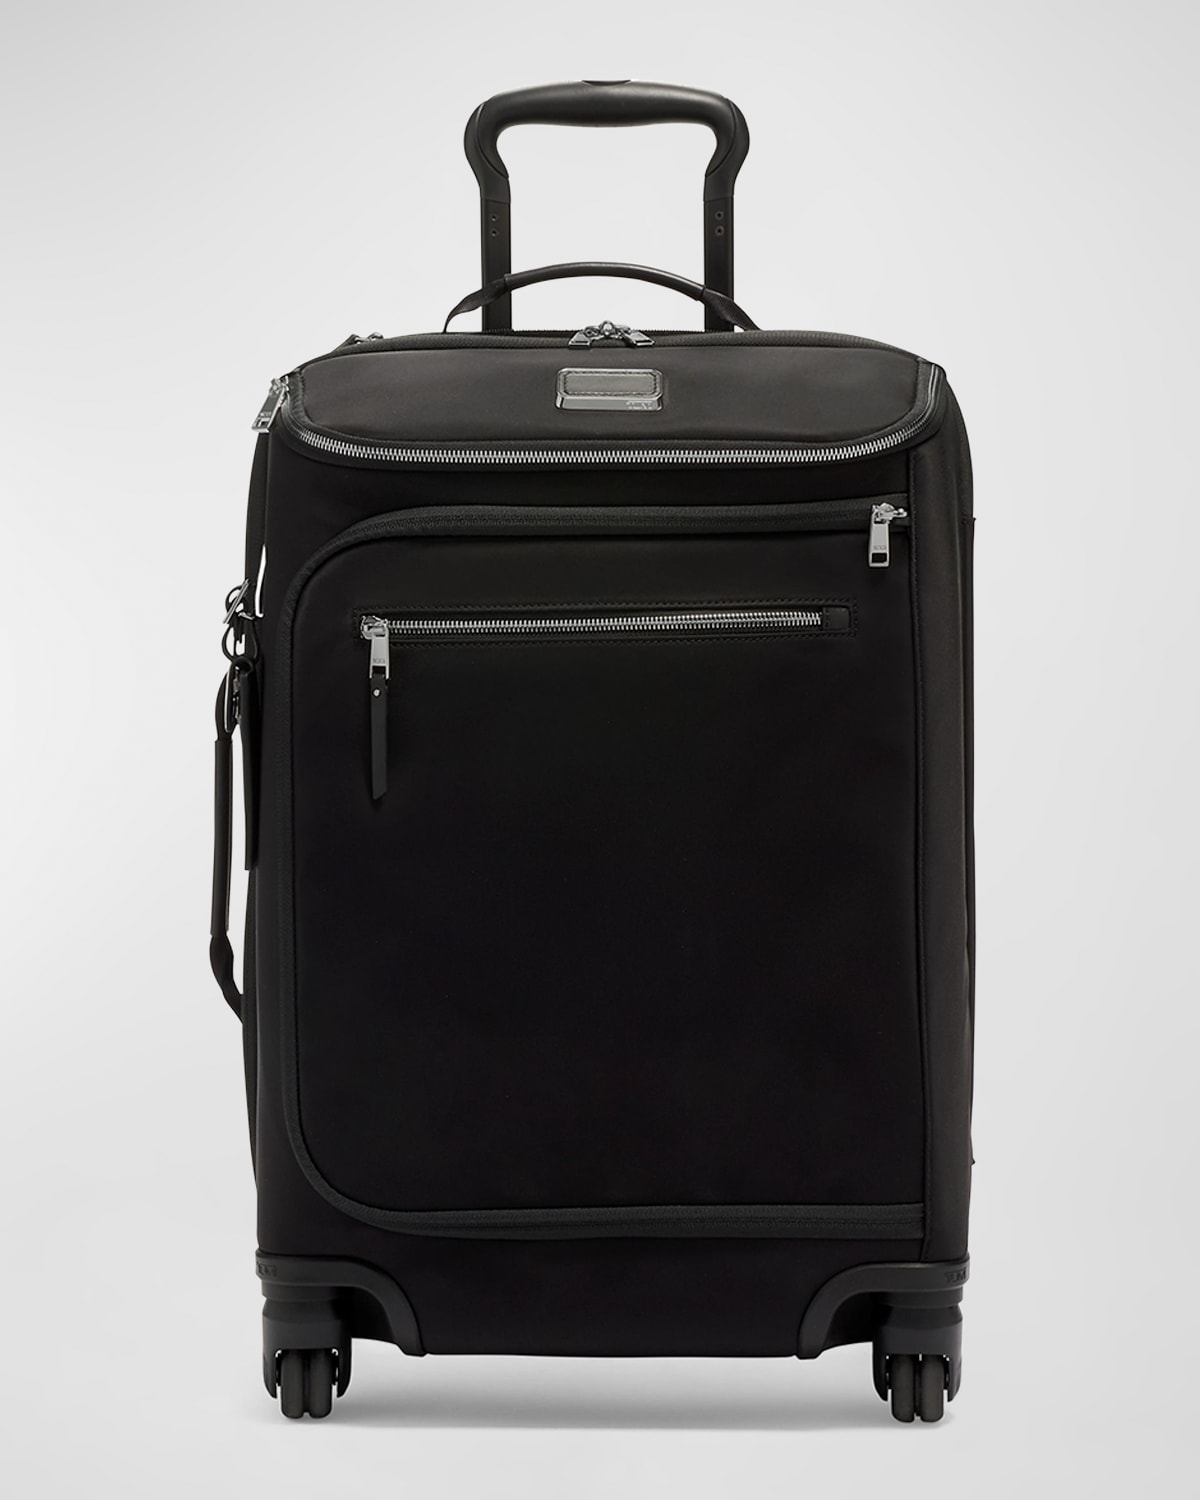 Tumi Leger International Carry-on Luggage In Black